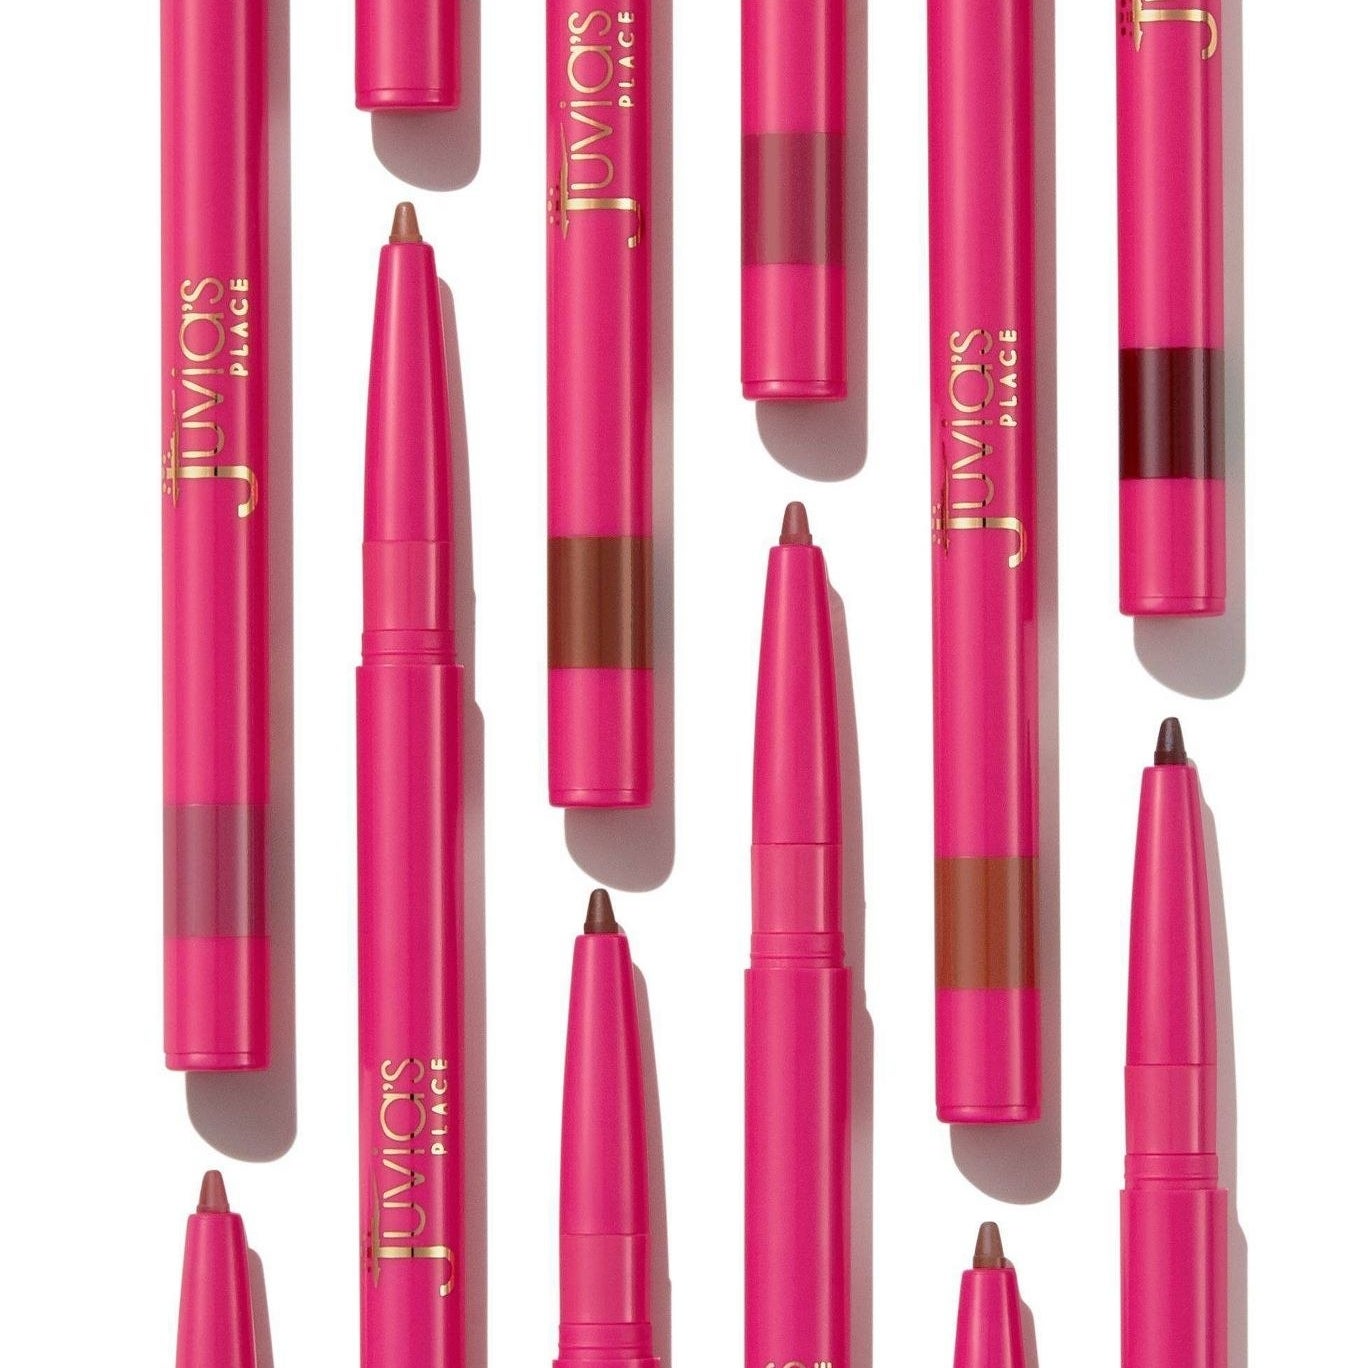 The Juvia&#x27;s Place Lux Lip Liner